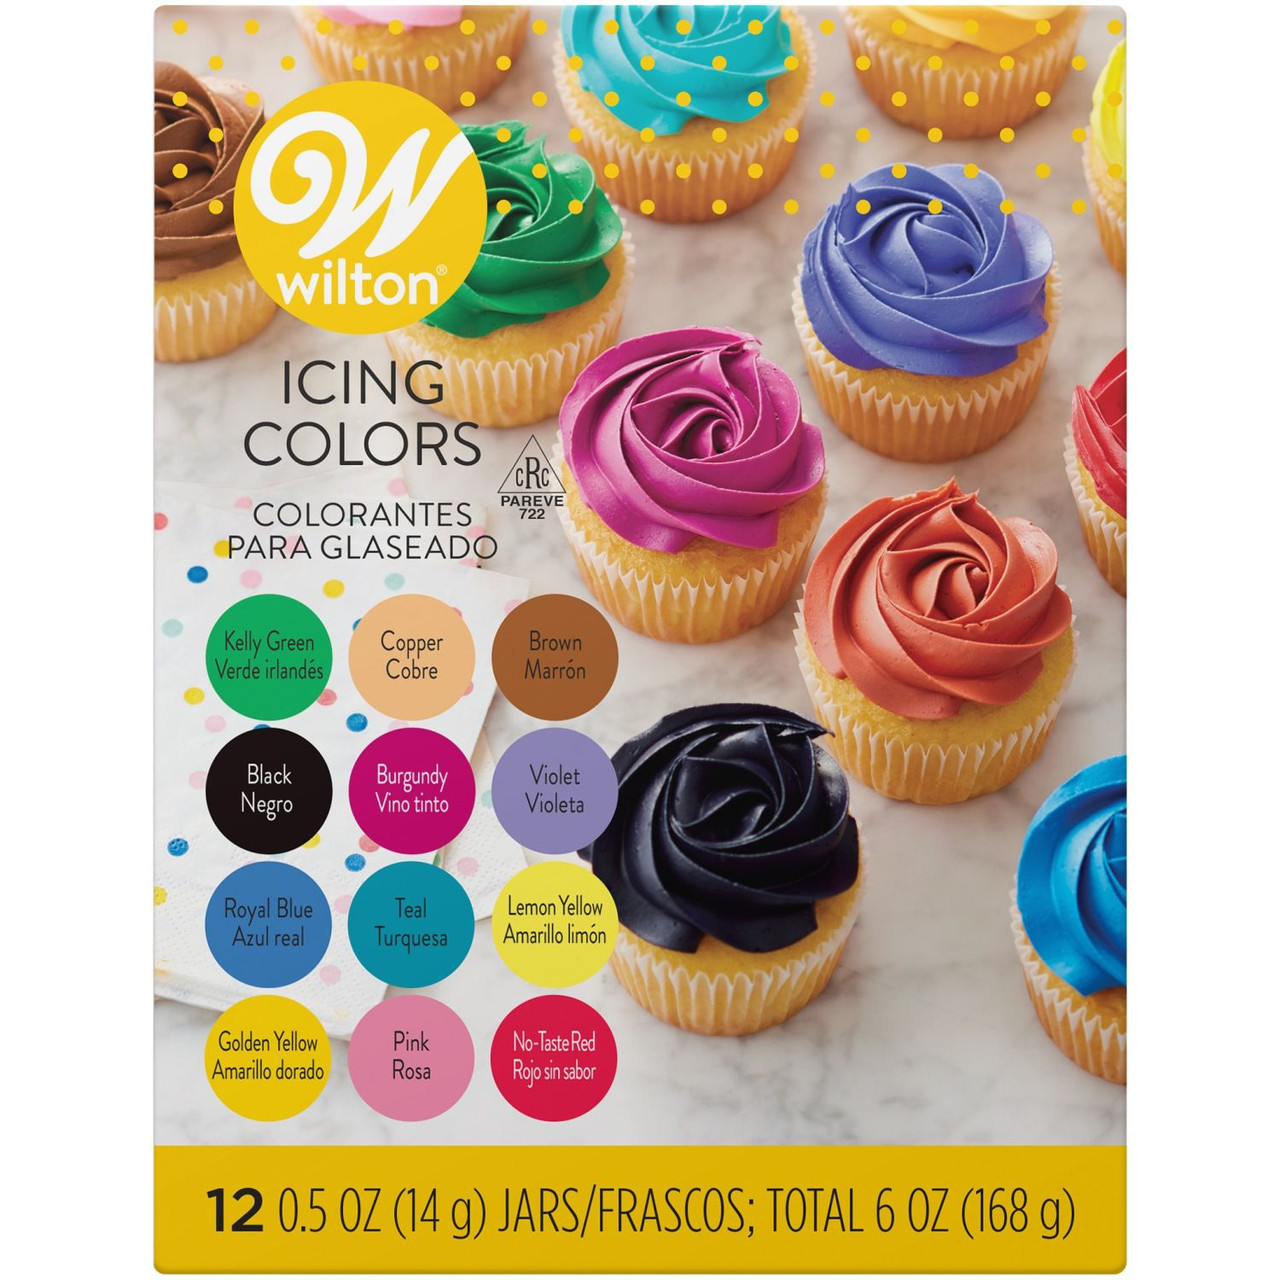 Edible Gel Food Coloring Set for Baking and Decorating, 6 oz. (12